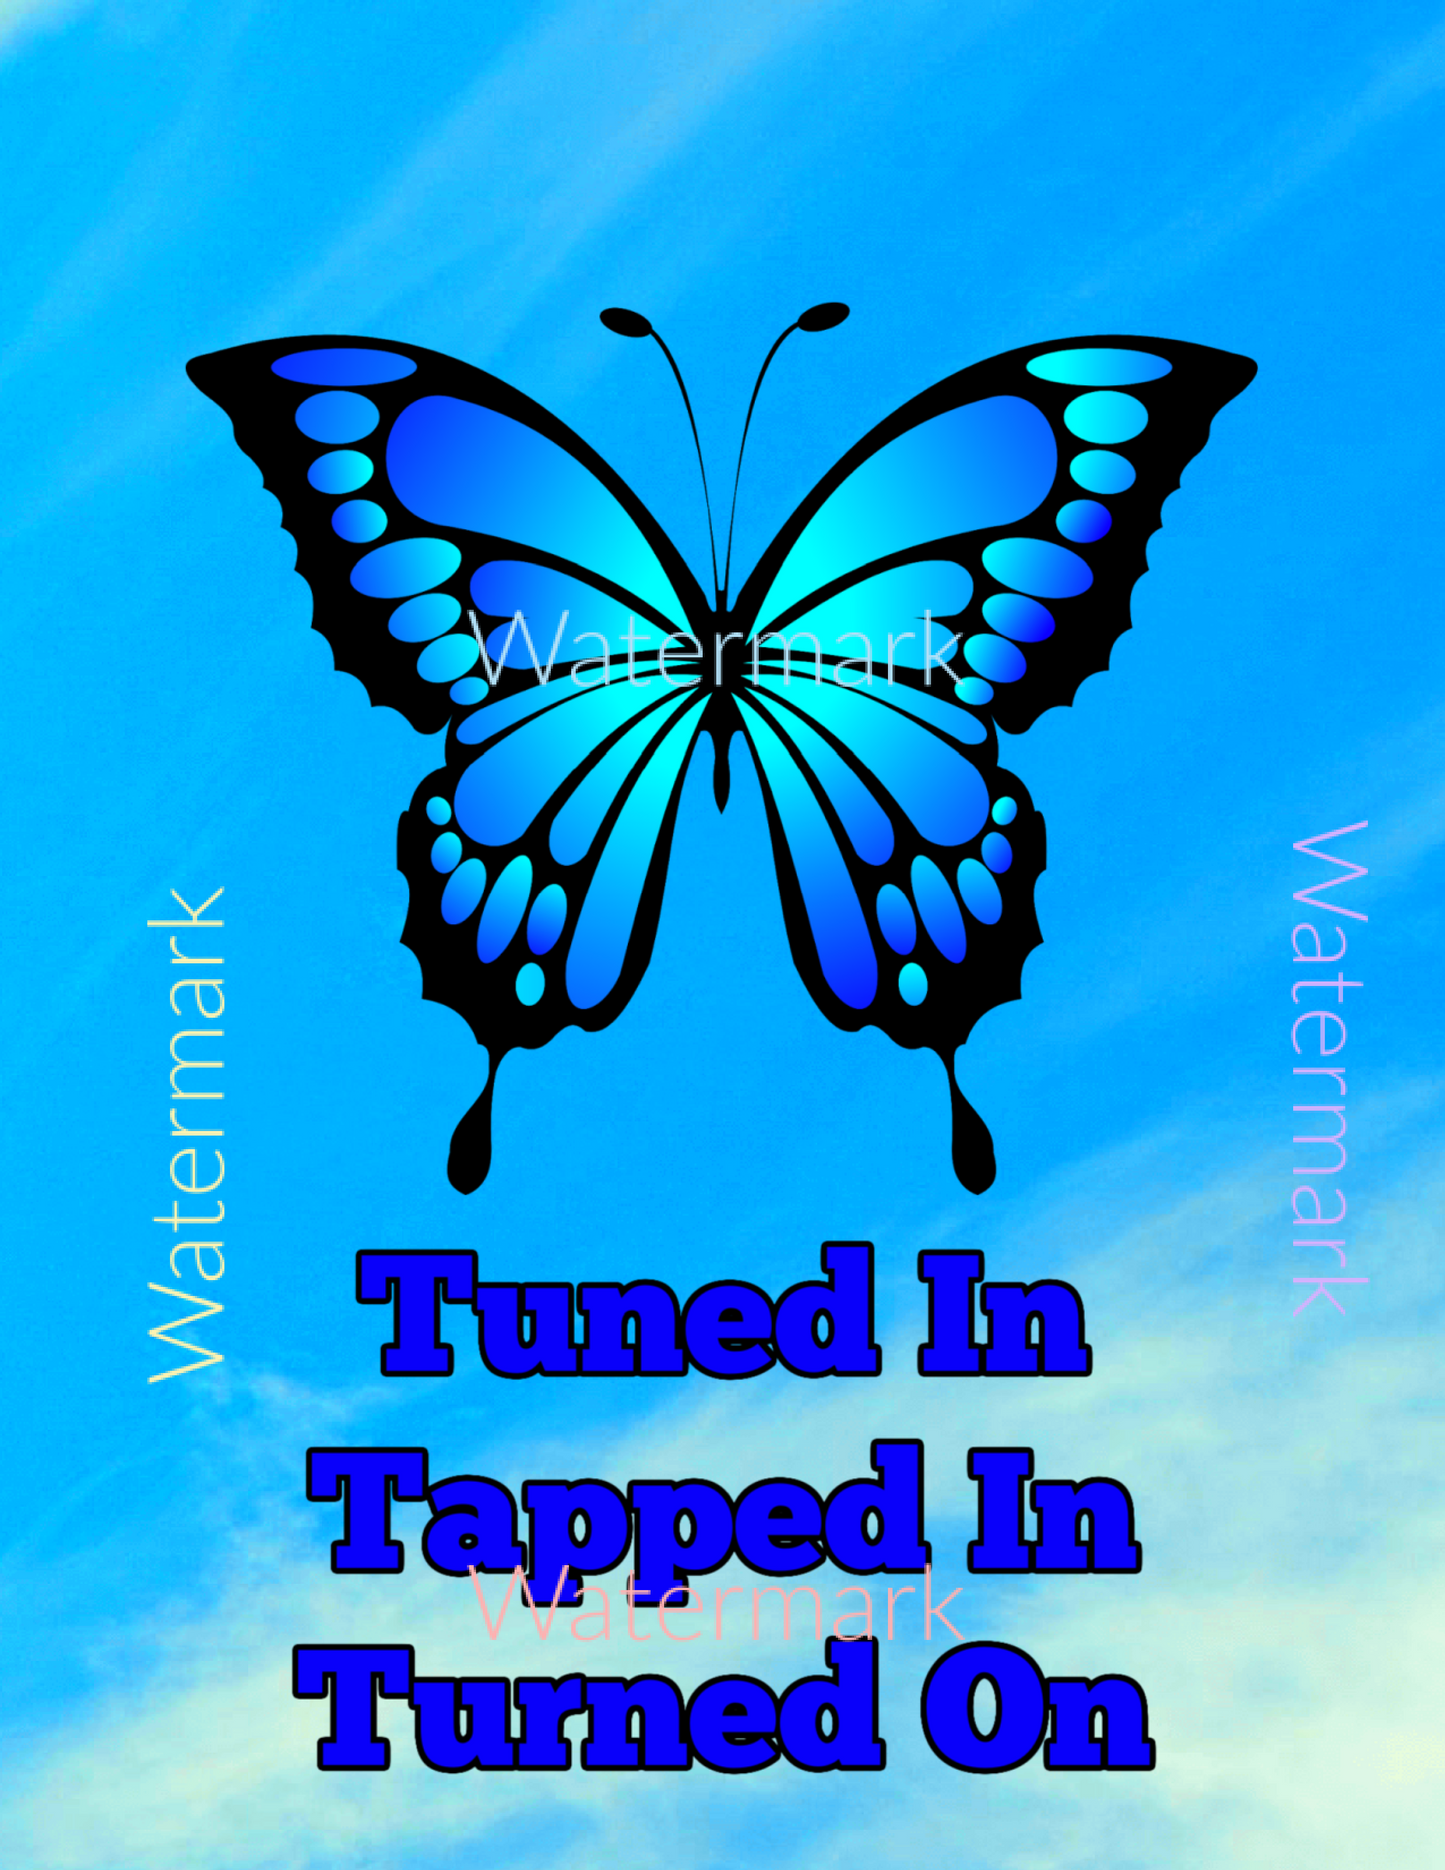 FREE Wall Art - "Tuned In, Tapped In & Turned On" - Abraham Hicks Instant Wall Art Freebie